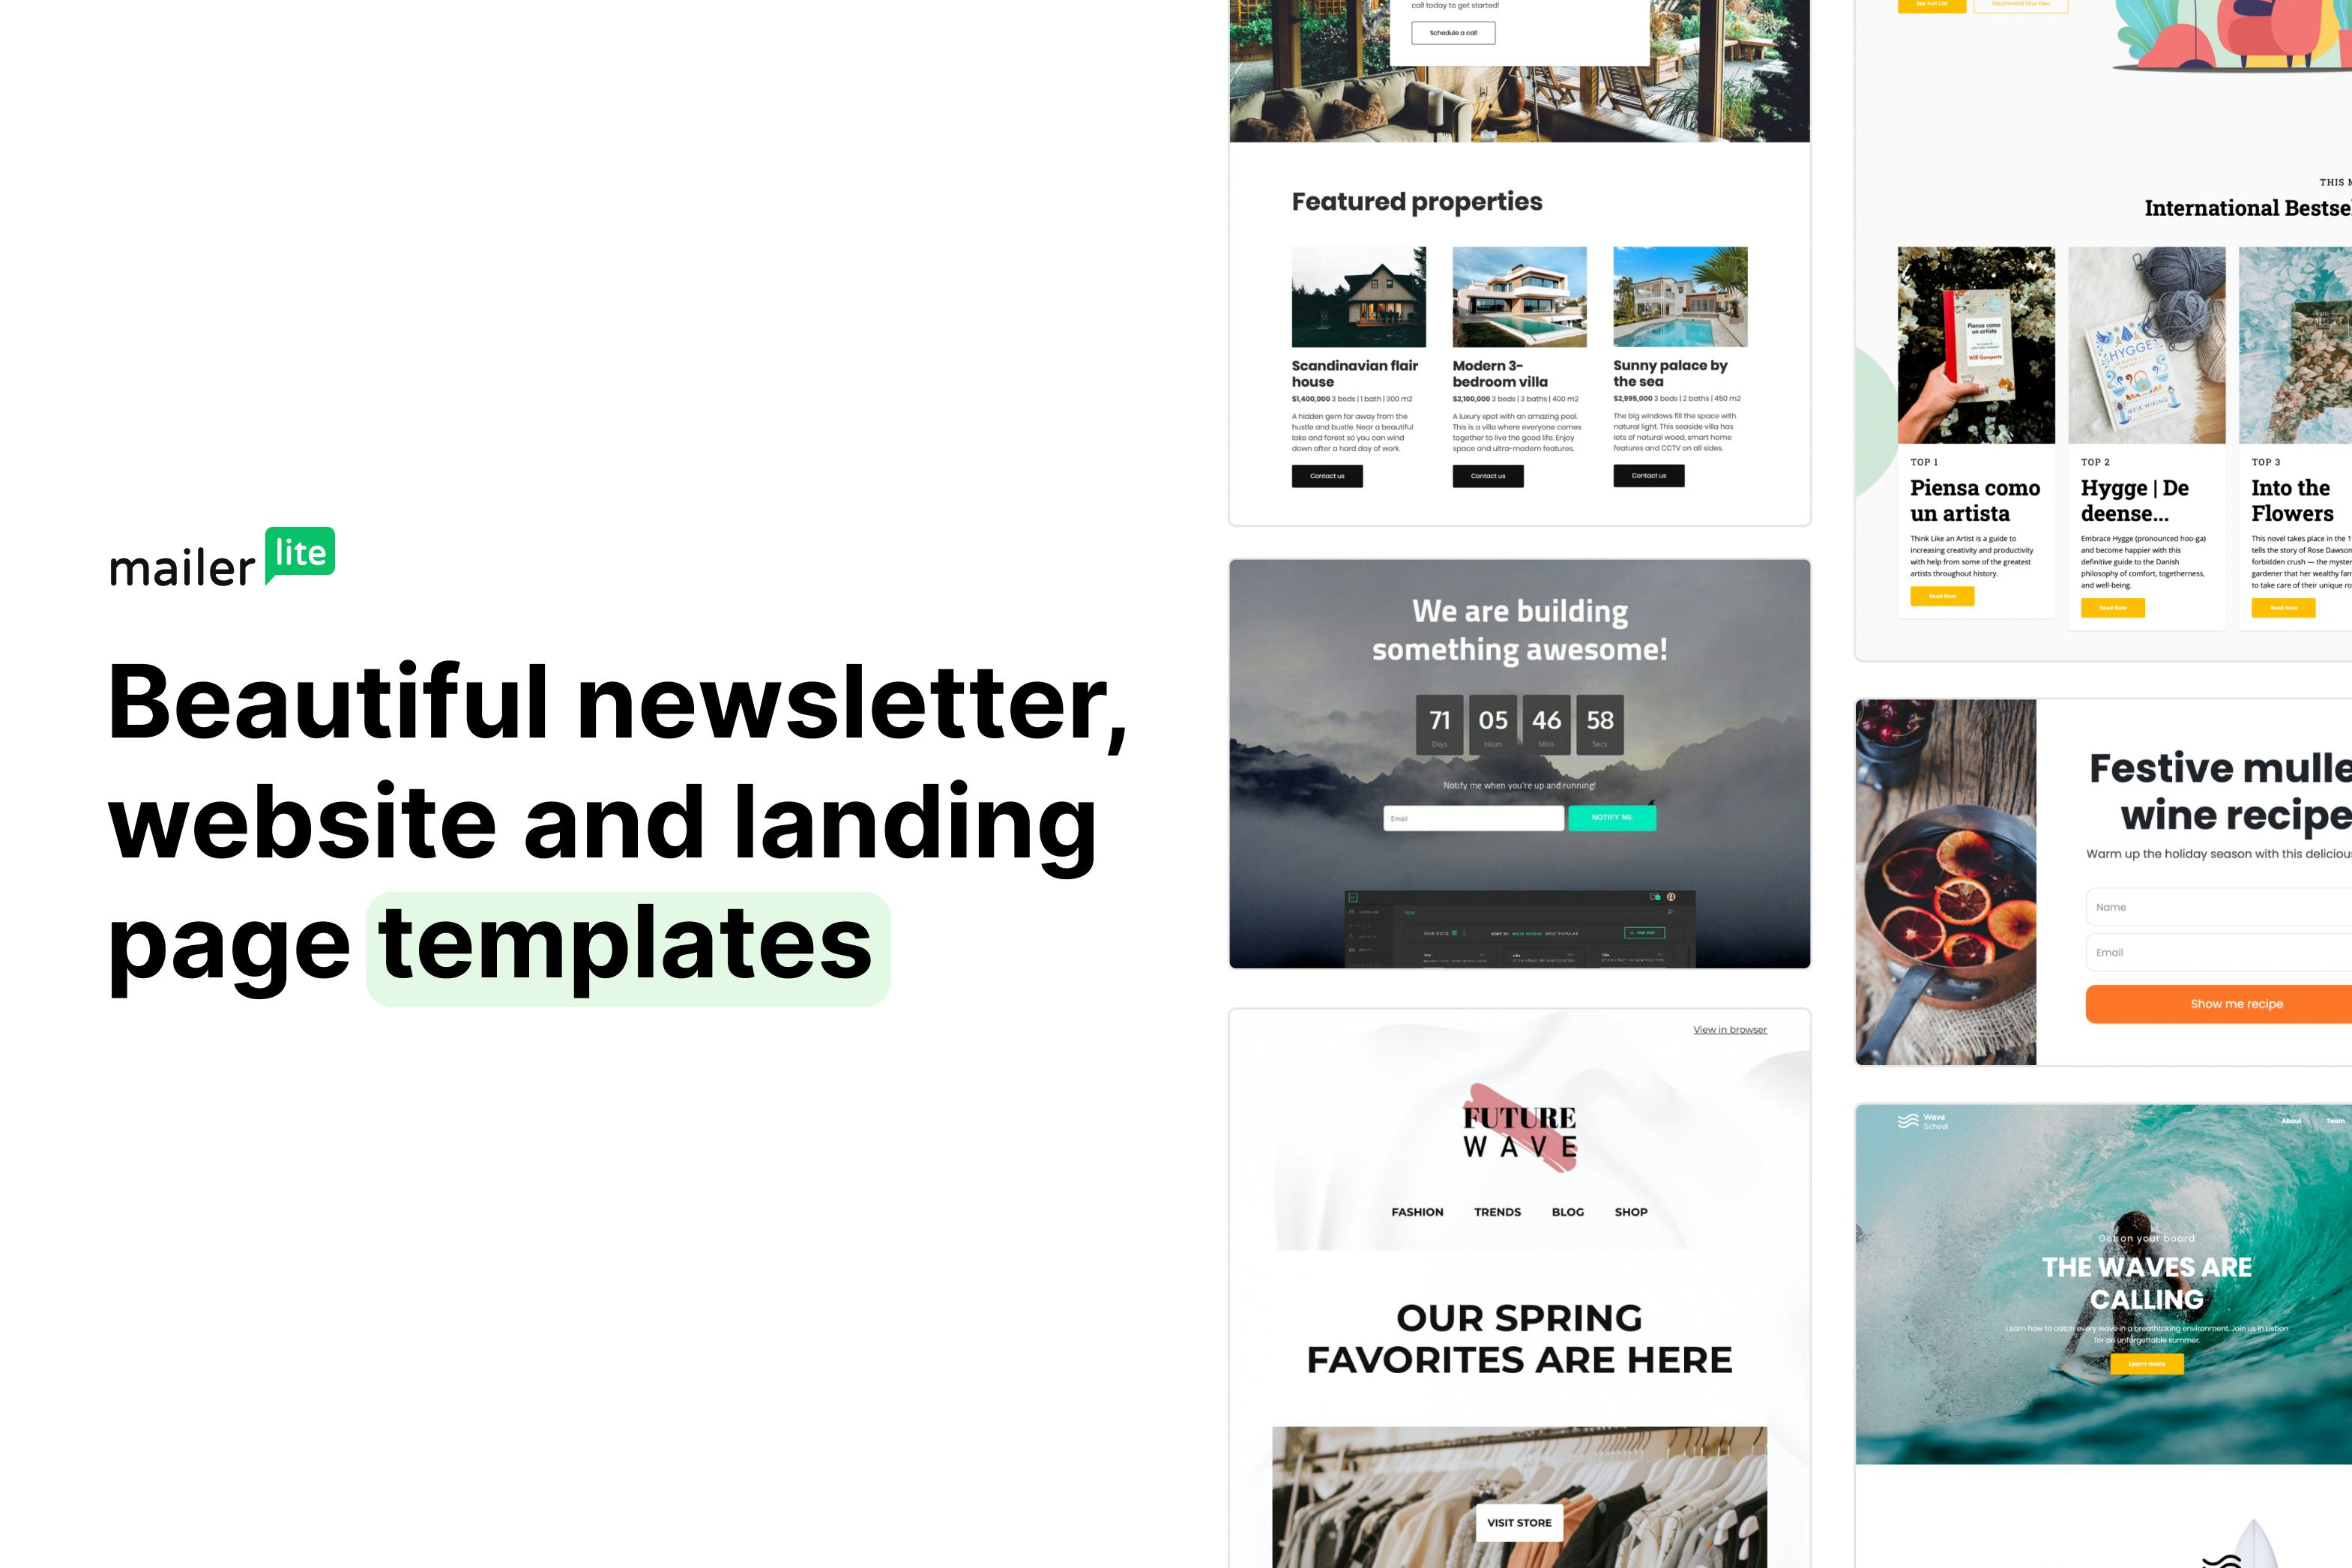 MailerLite Software - a variety of templates for newsletters, websites and landing pages